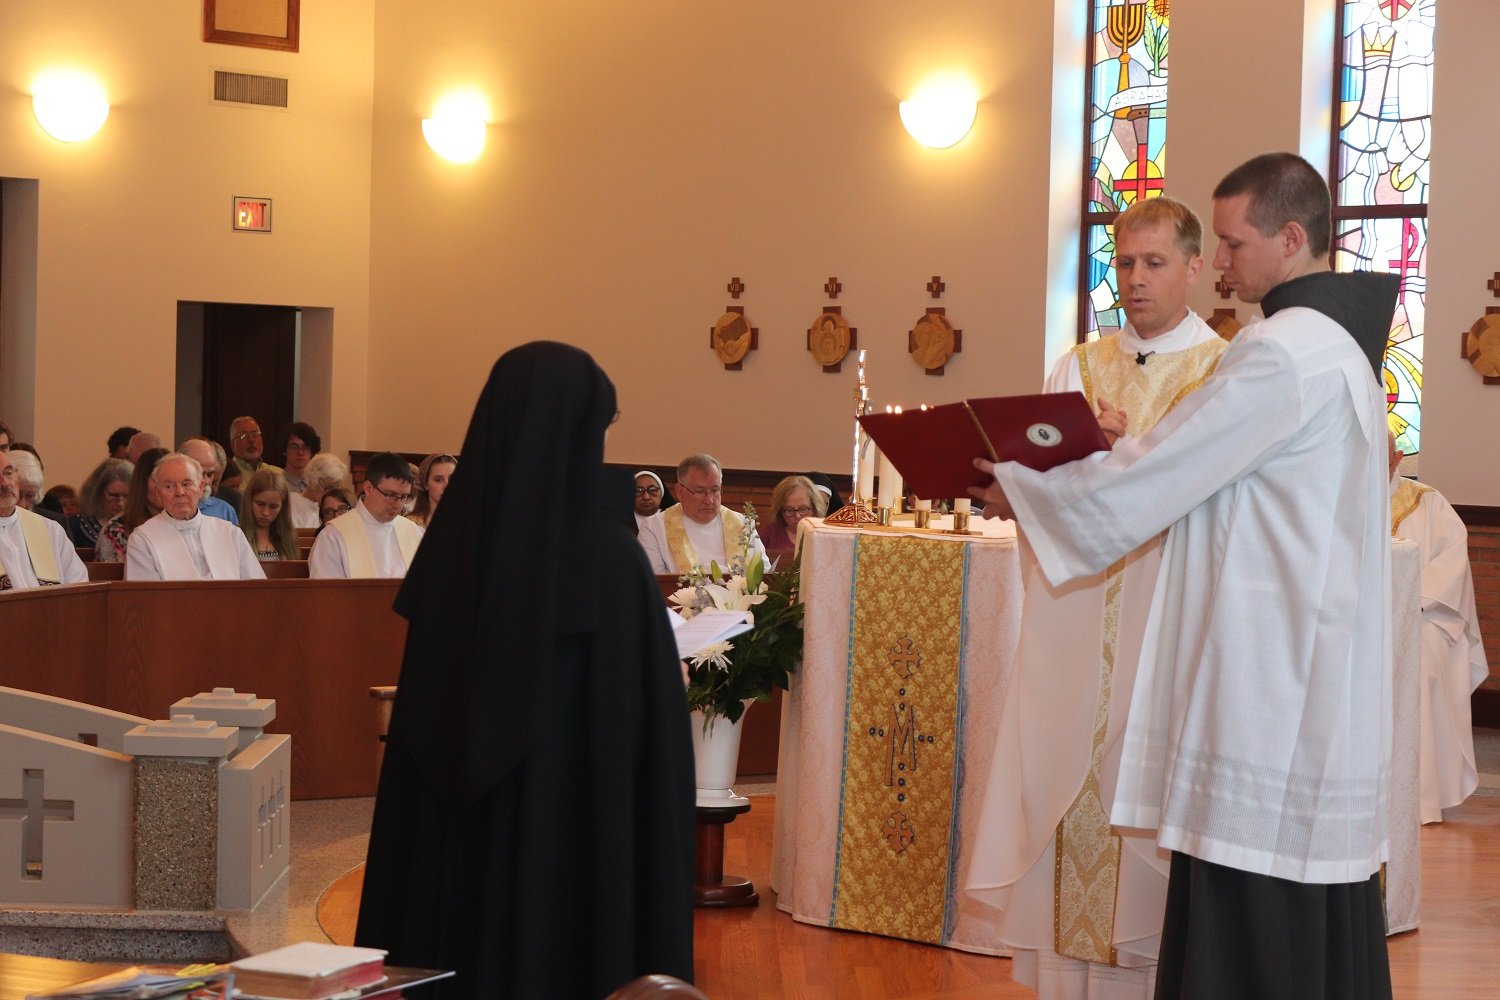  The examination: Fr. Tony  formally questions Sister on her resolve to profess and live the five Passionist vows perpetually. 